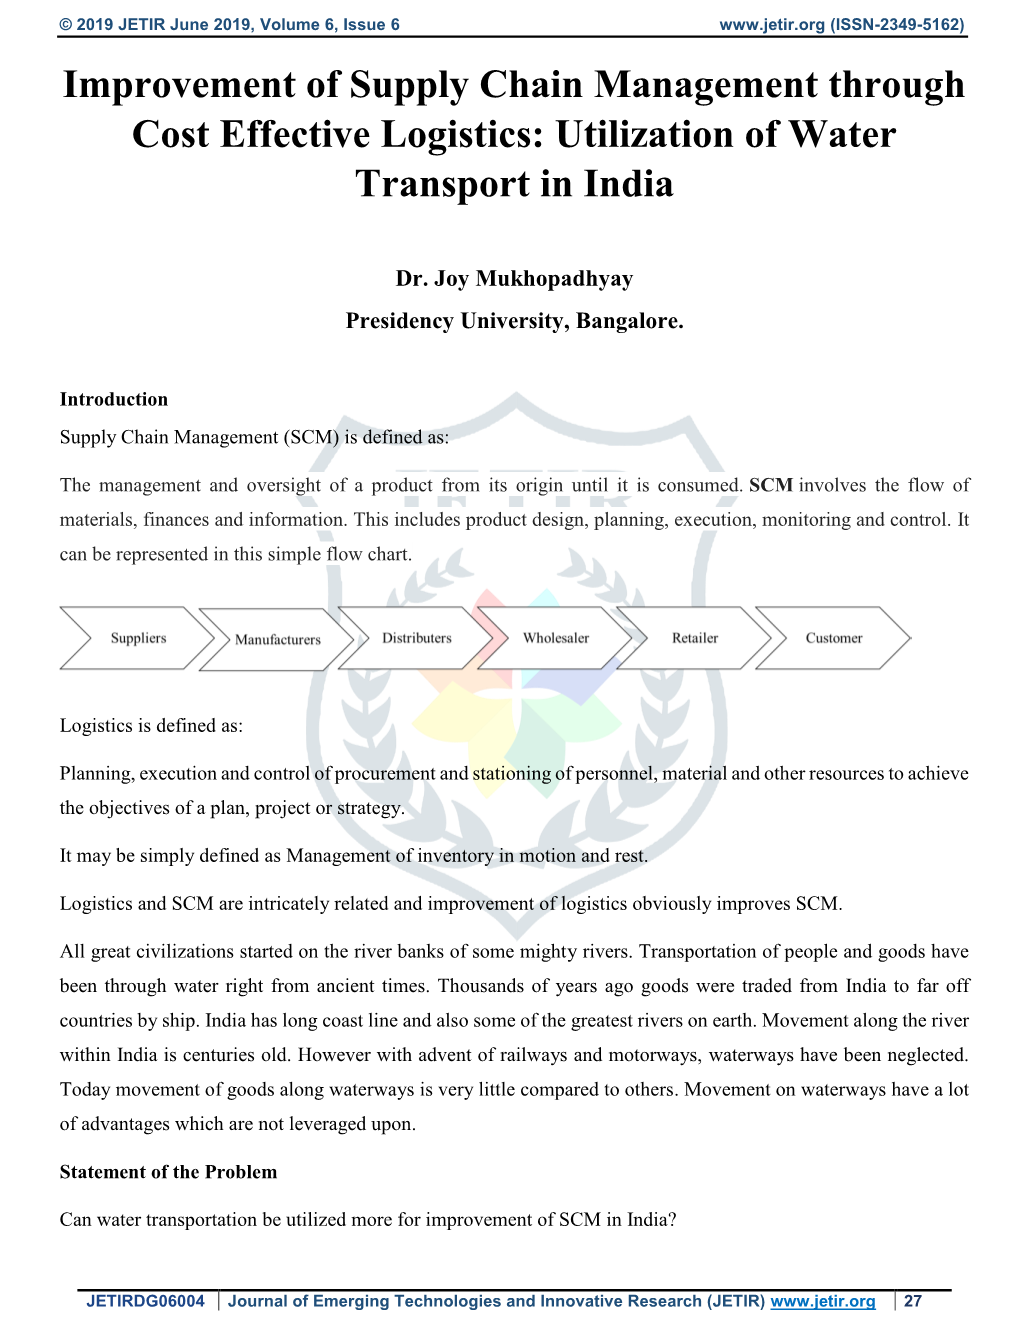 Improvement of Supply Chain Management Through Cost Effective Logistics: Utilization of Water Transport in India